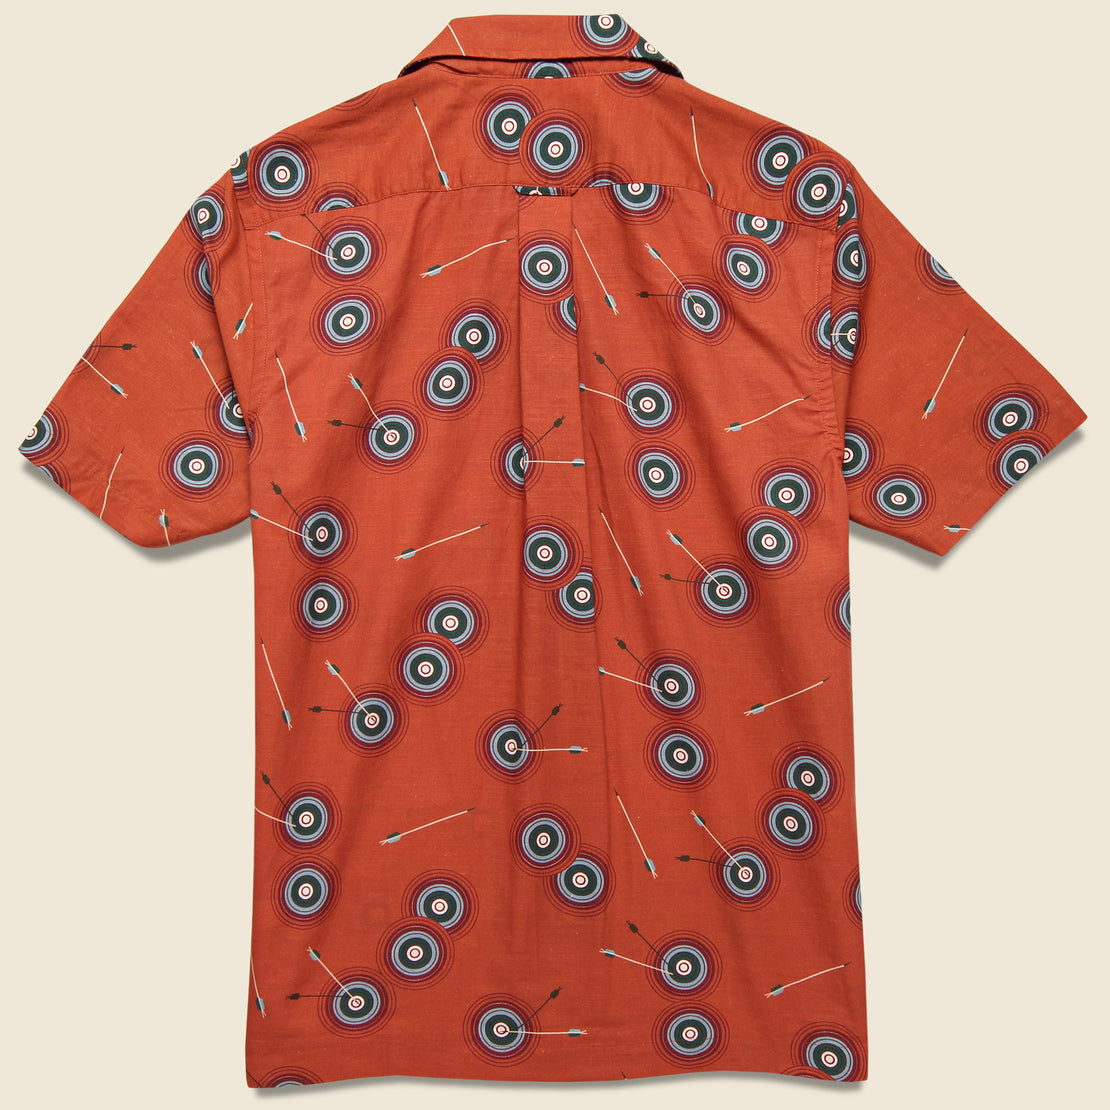 Bullseye Camp Shirt - Clay - Todd Snyder - STAG Provisions - Tops - S/S Woven - Other Pattern